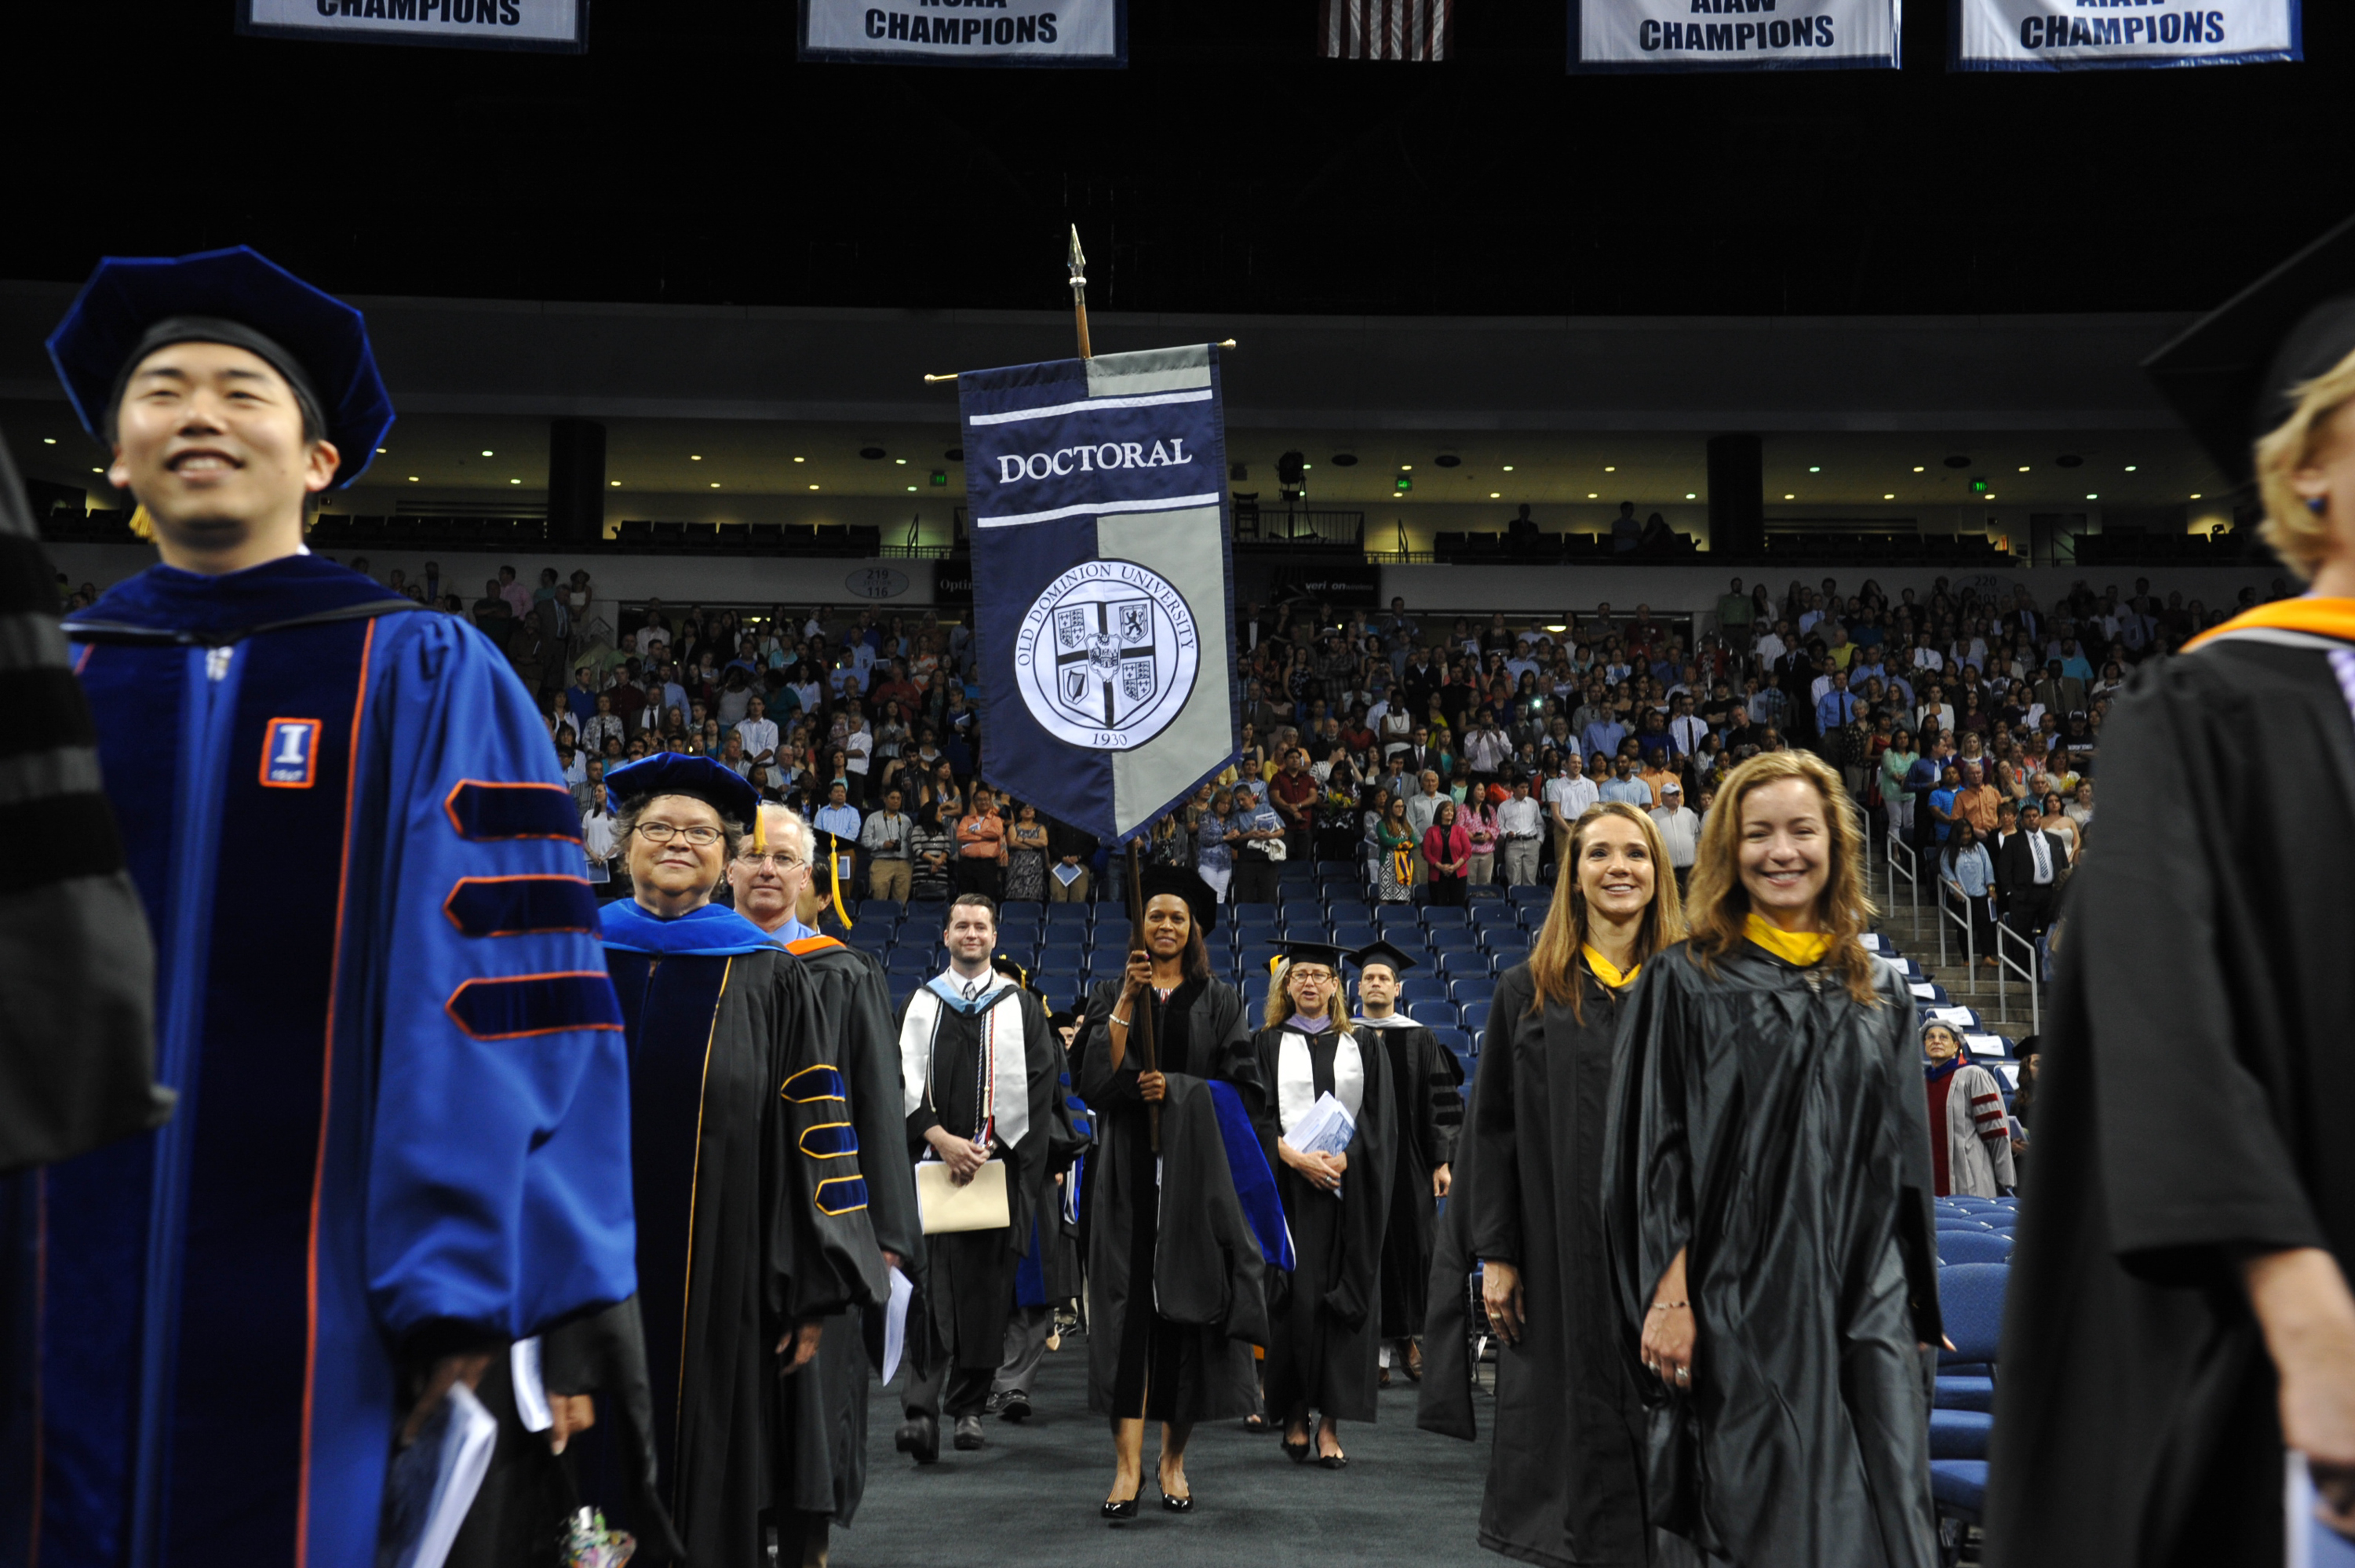 Spring 2015 Commencement - May 9, 2015 : 9:00 a.m.